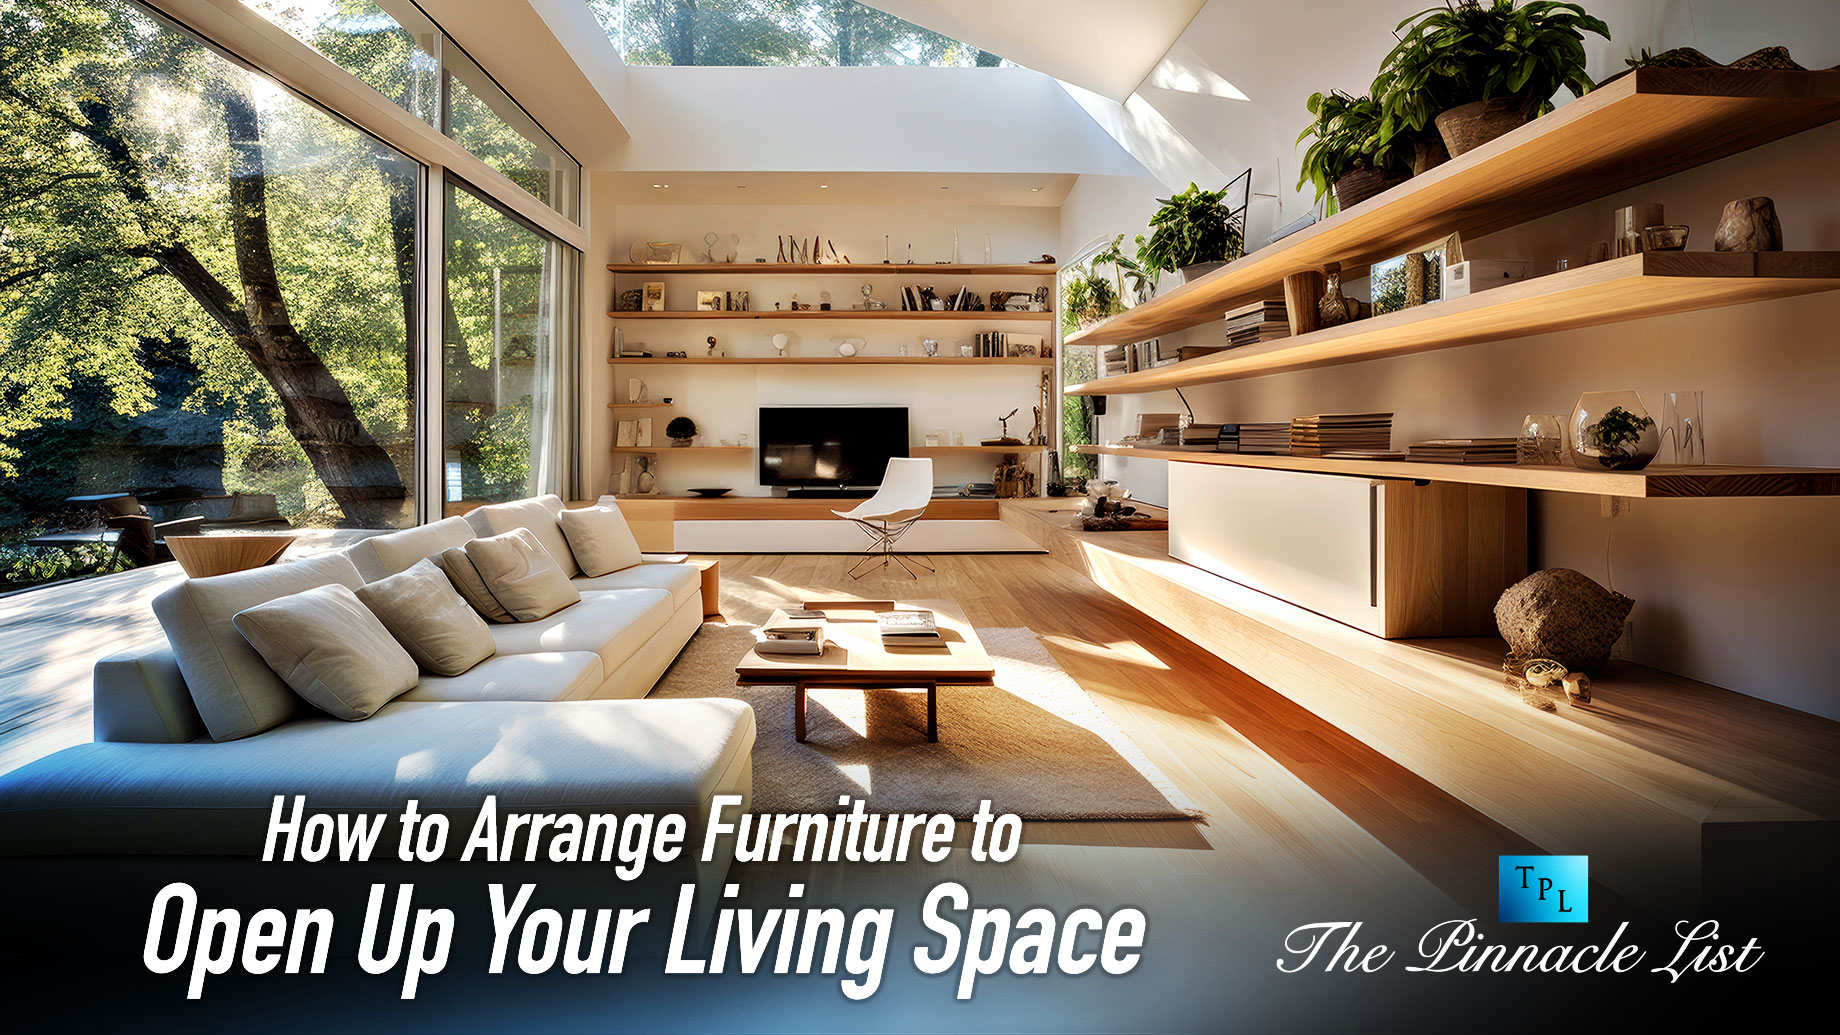 How to Arrange Furniture to Open Up Your Living Space